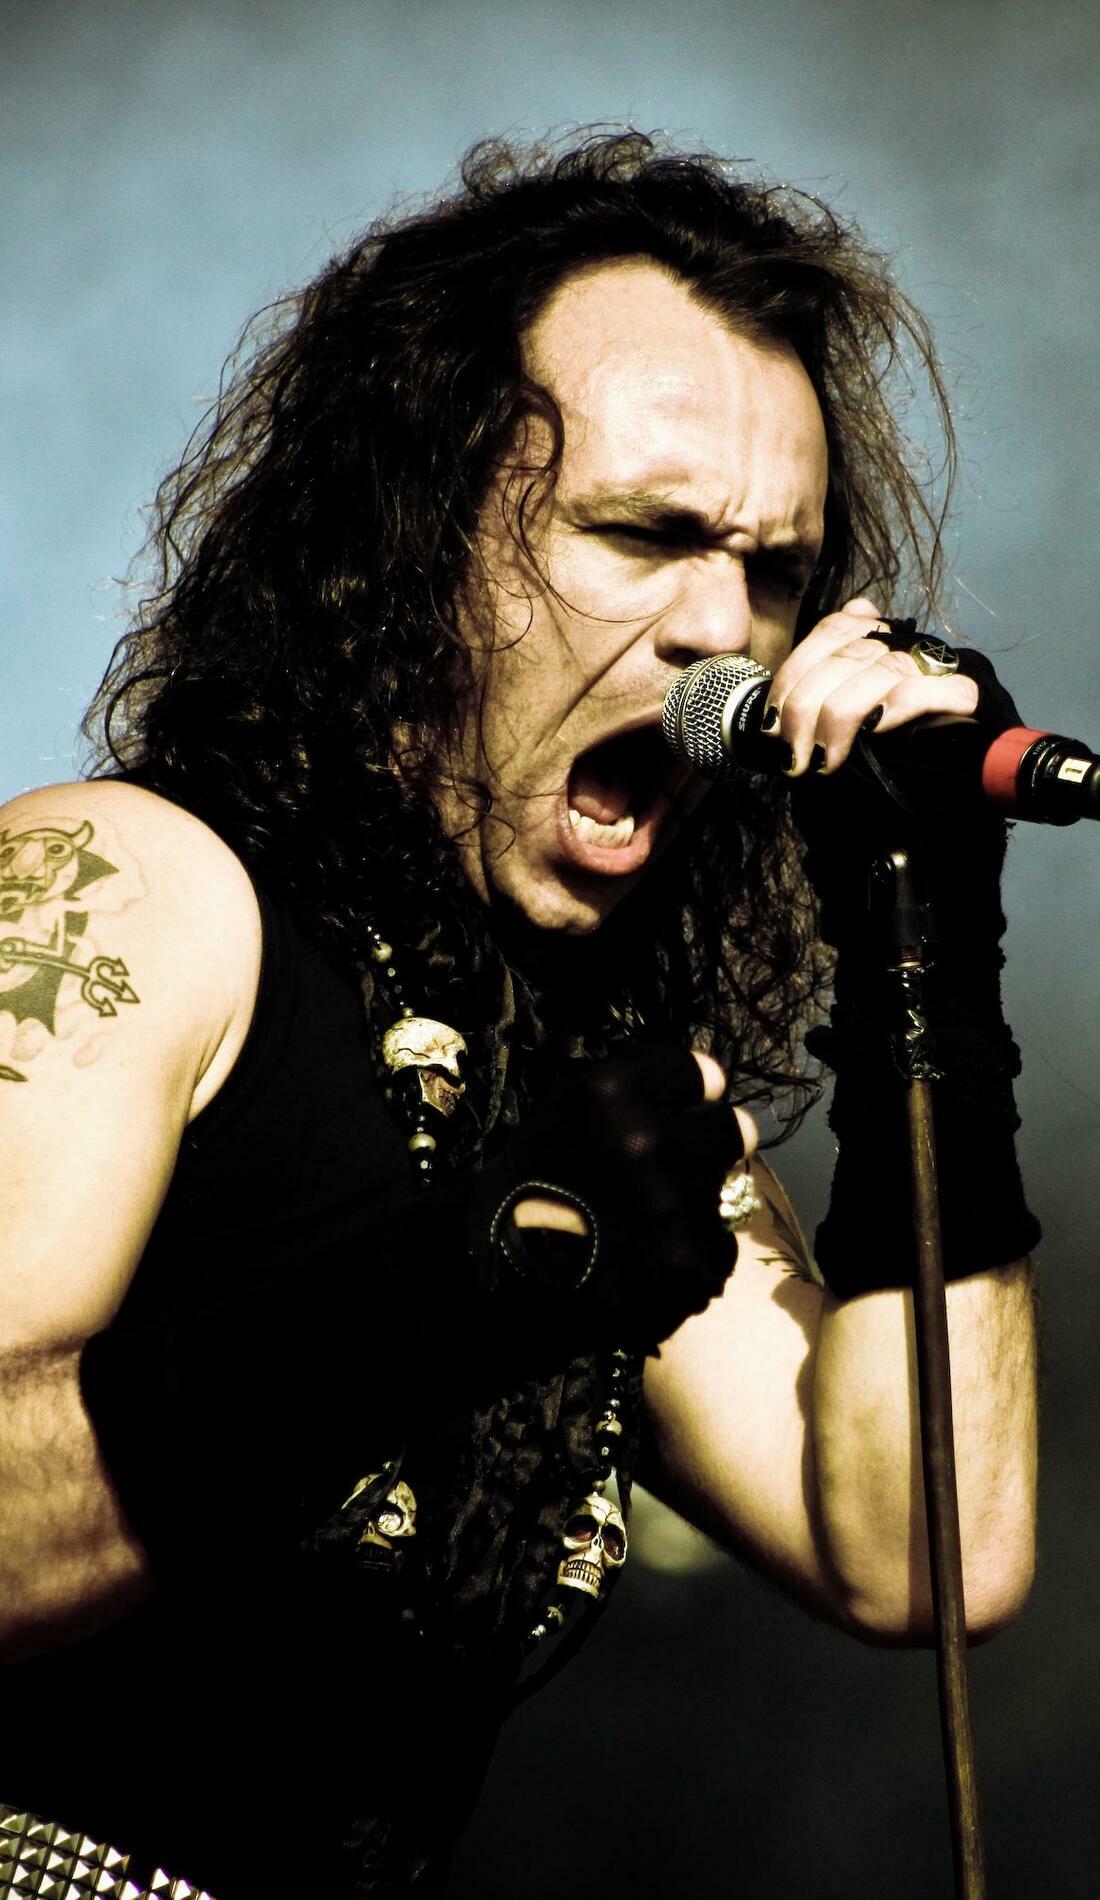 A Moonspell live event